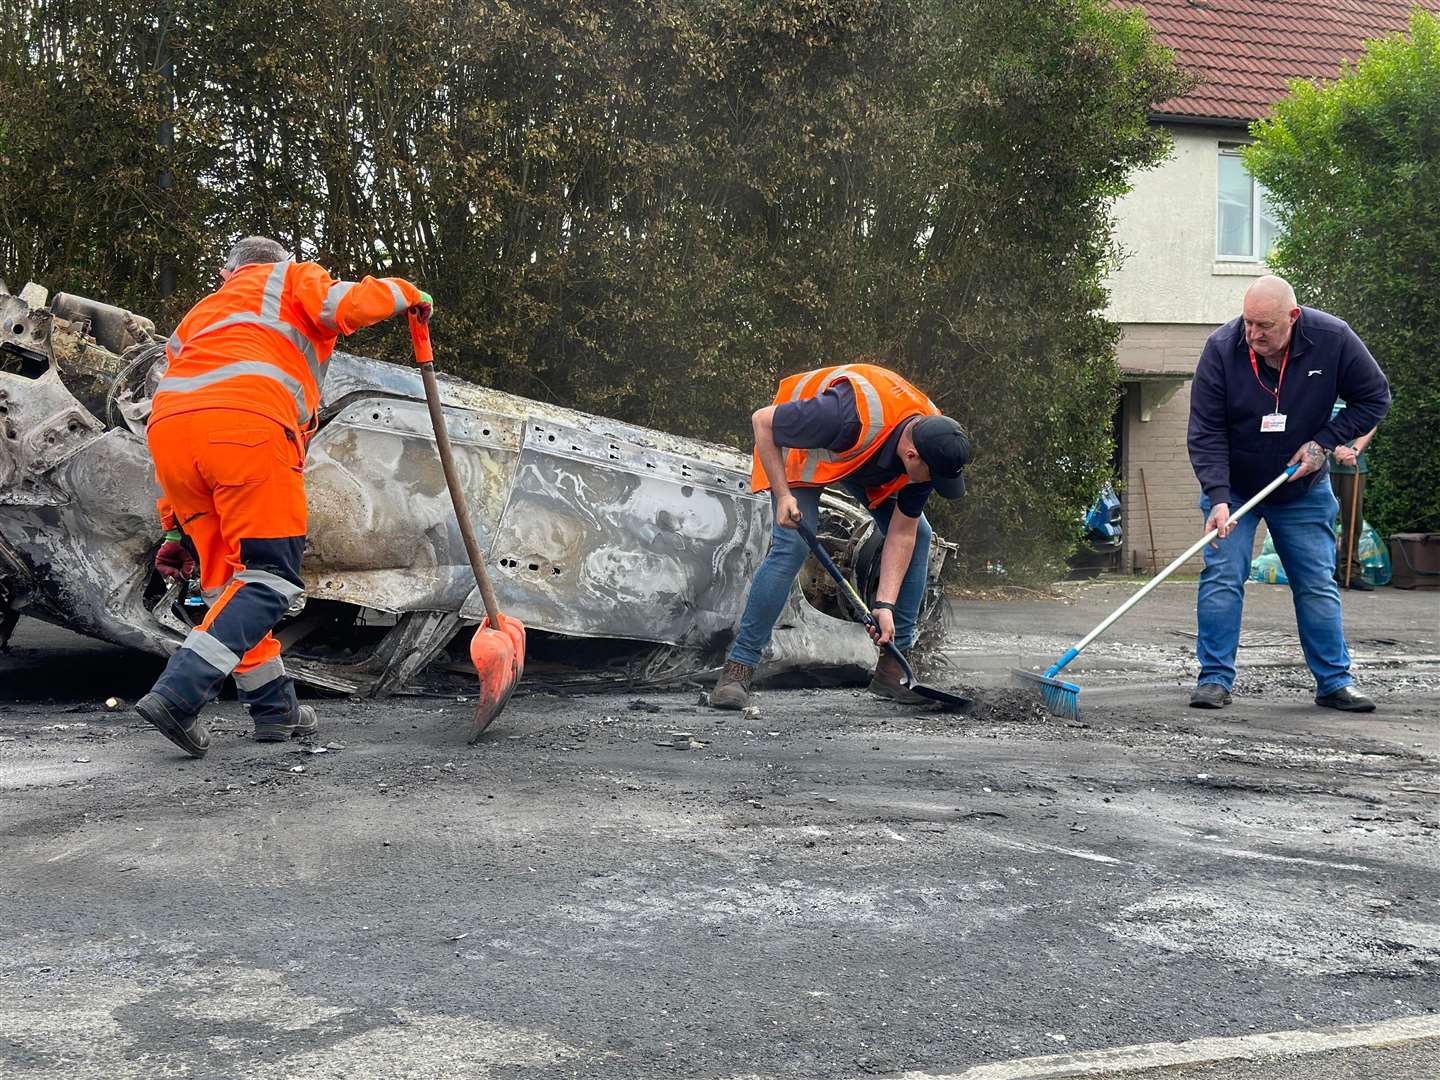 Council workers clear debris from the area immediately around a car that was set alight in Ely, Cardiff (PA)